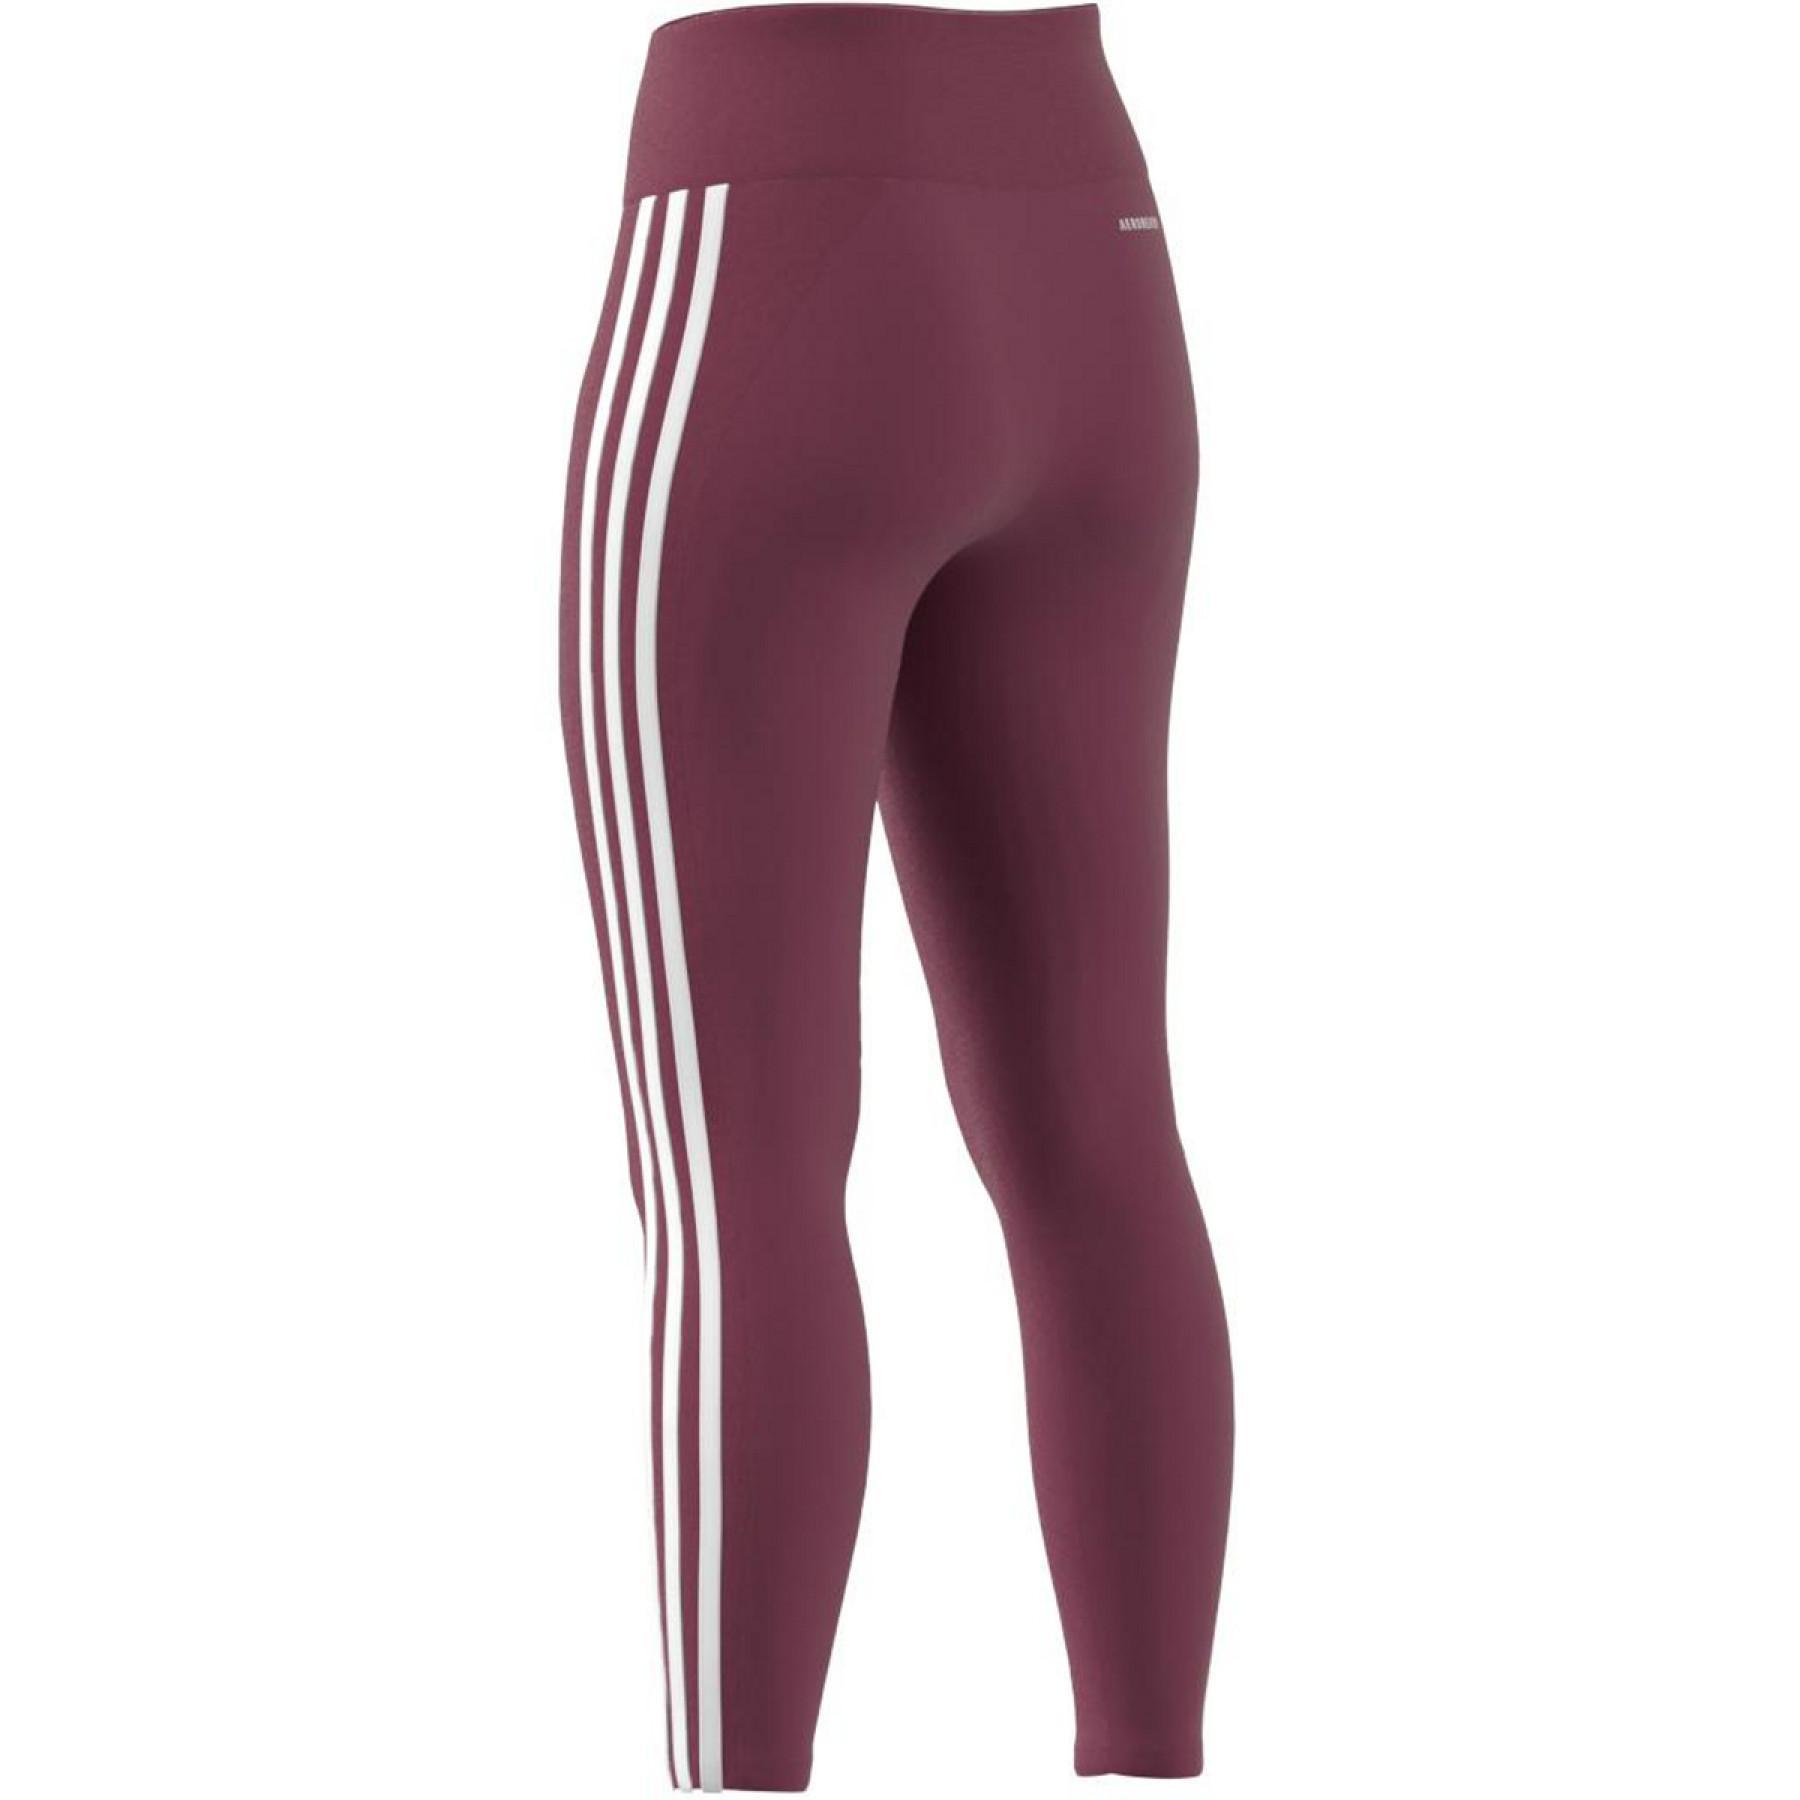 Damen-Leggings mit hoher Taille adidas Designed To Move 3-Bandes 7/8 Sport